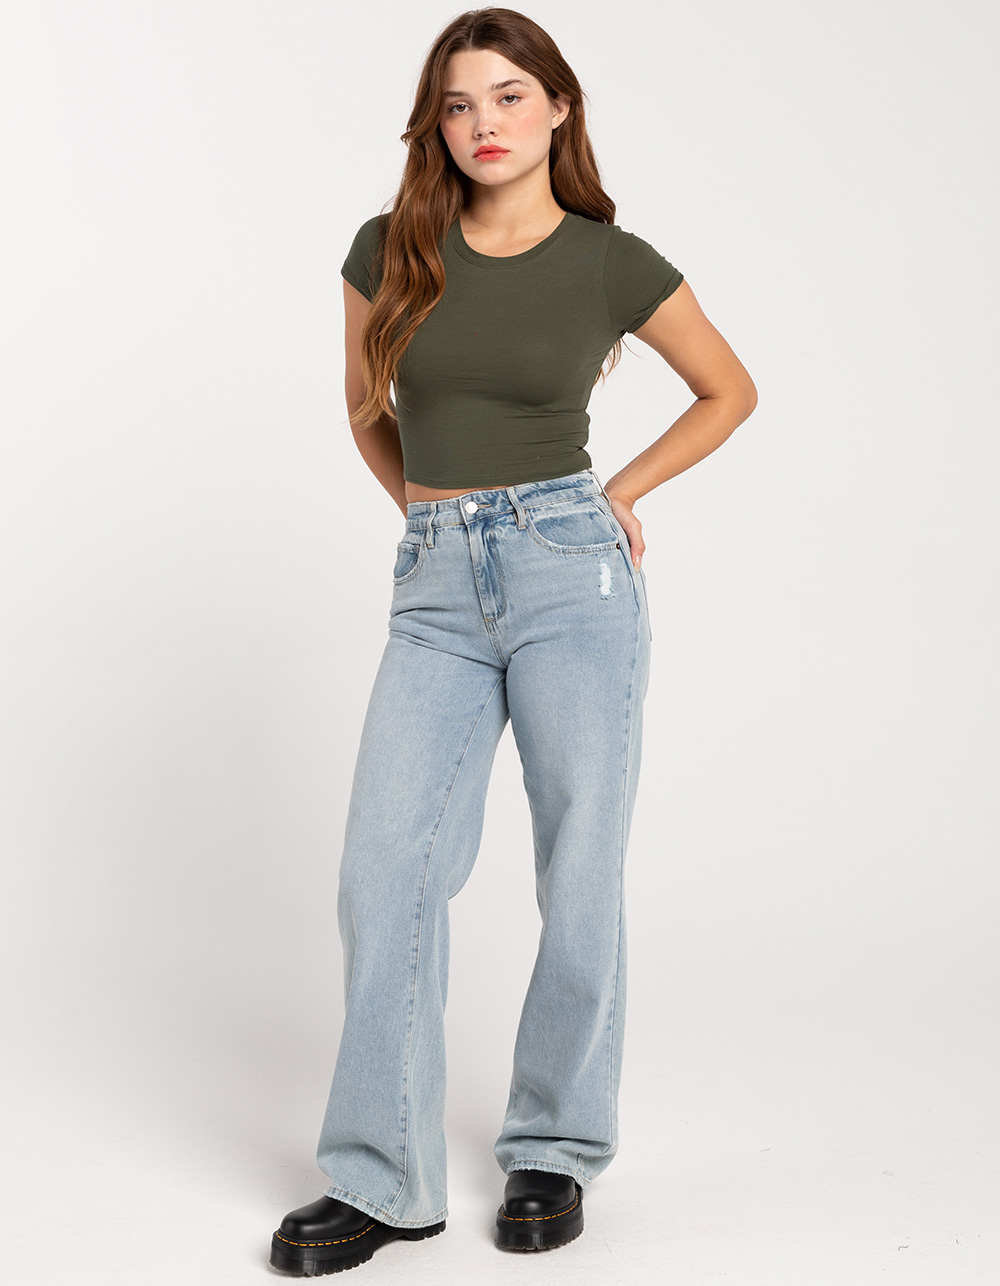 BOZZOLO Womens Cropped Tee - Tillys OLIVE 